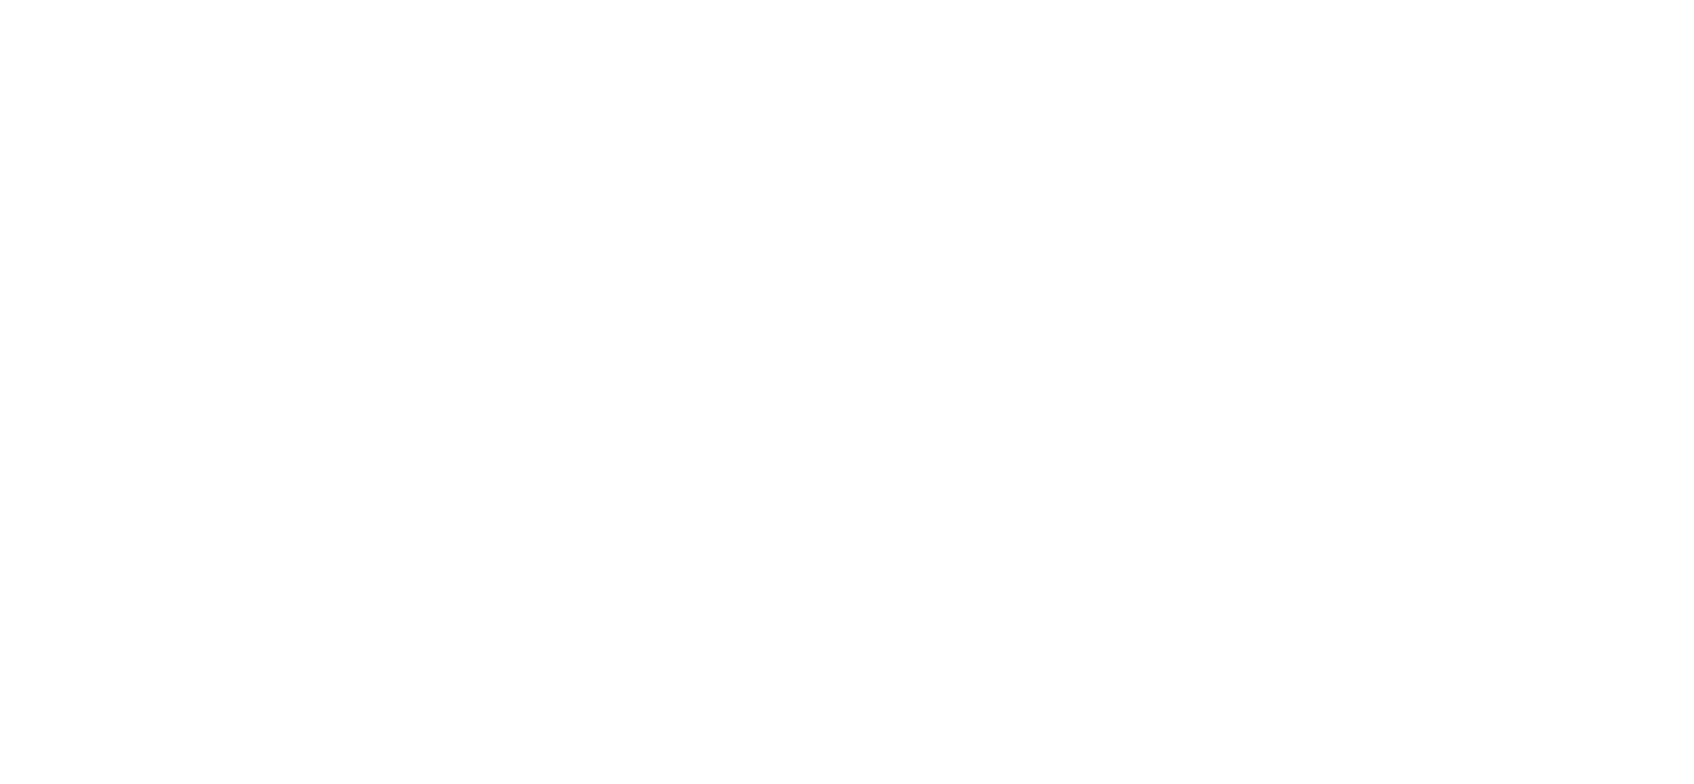 Large wavy text reading "SELF-EXPRESSION + MENTAL HEALTH + COMMUNITY = SoVM"